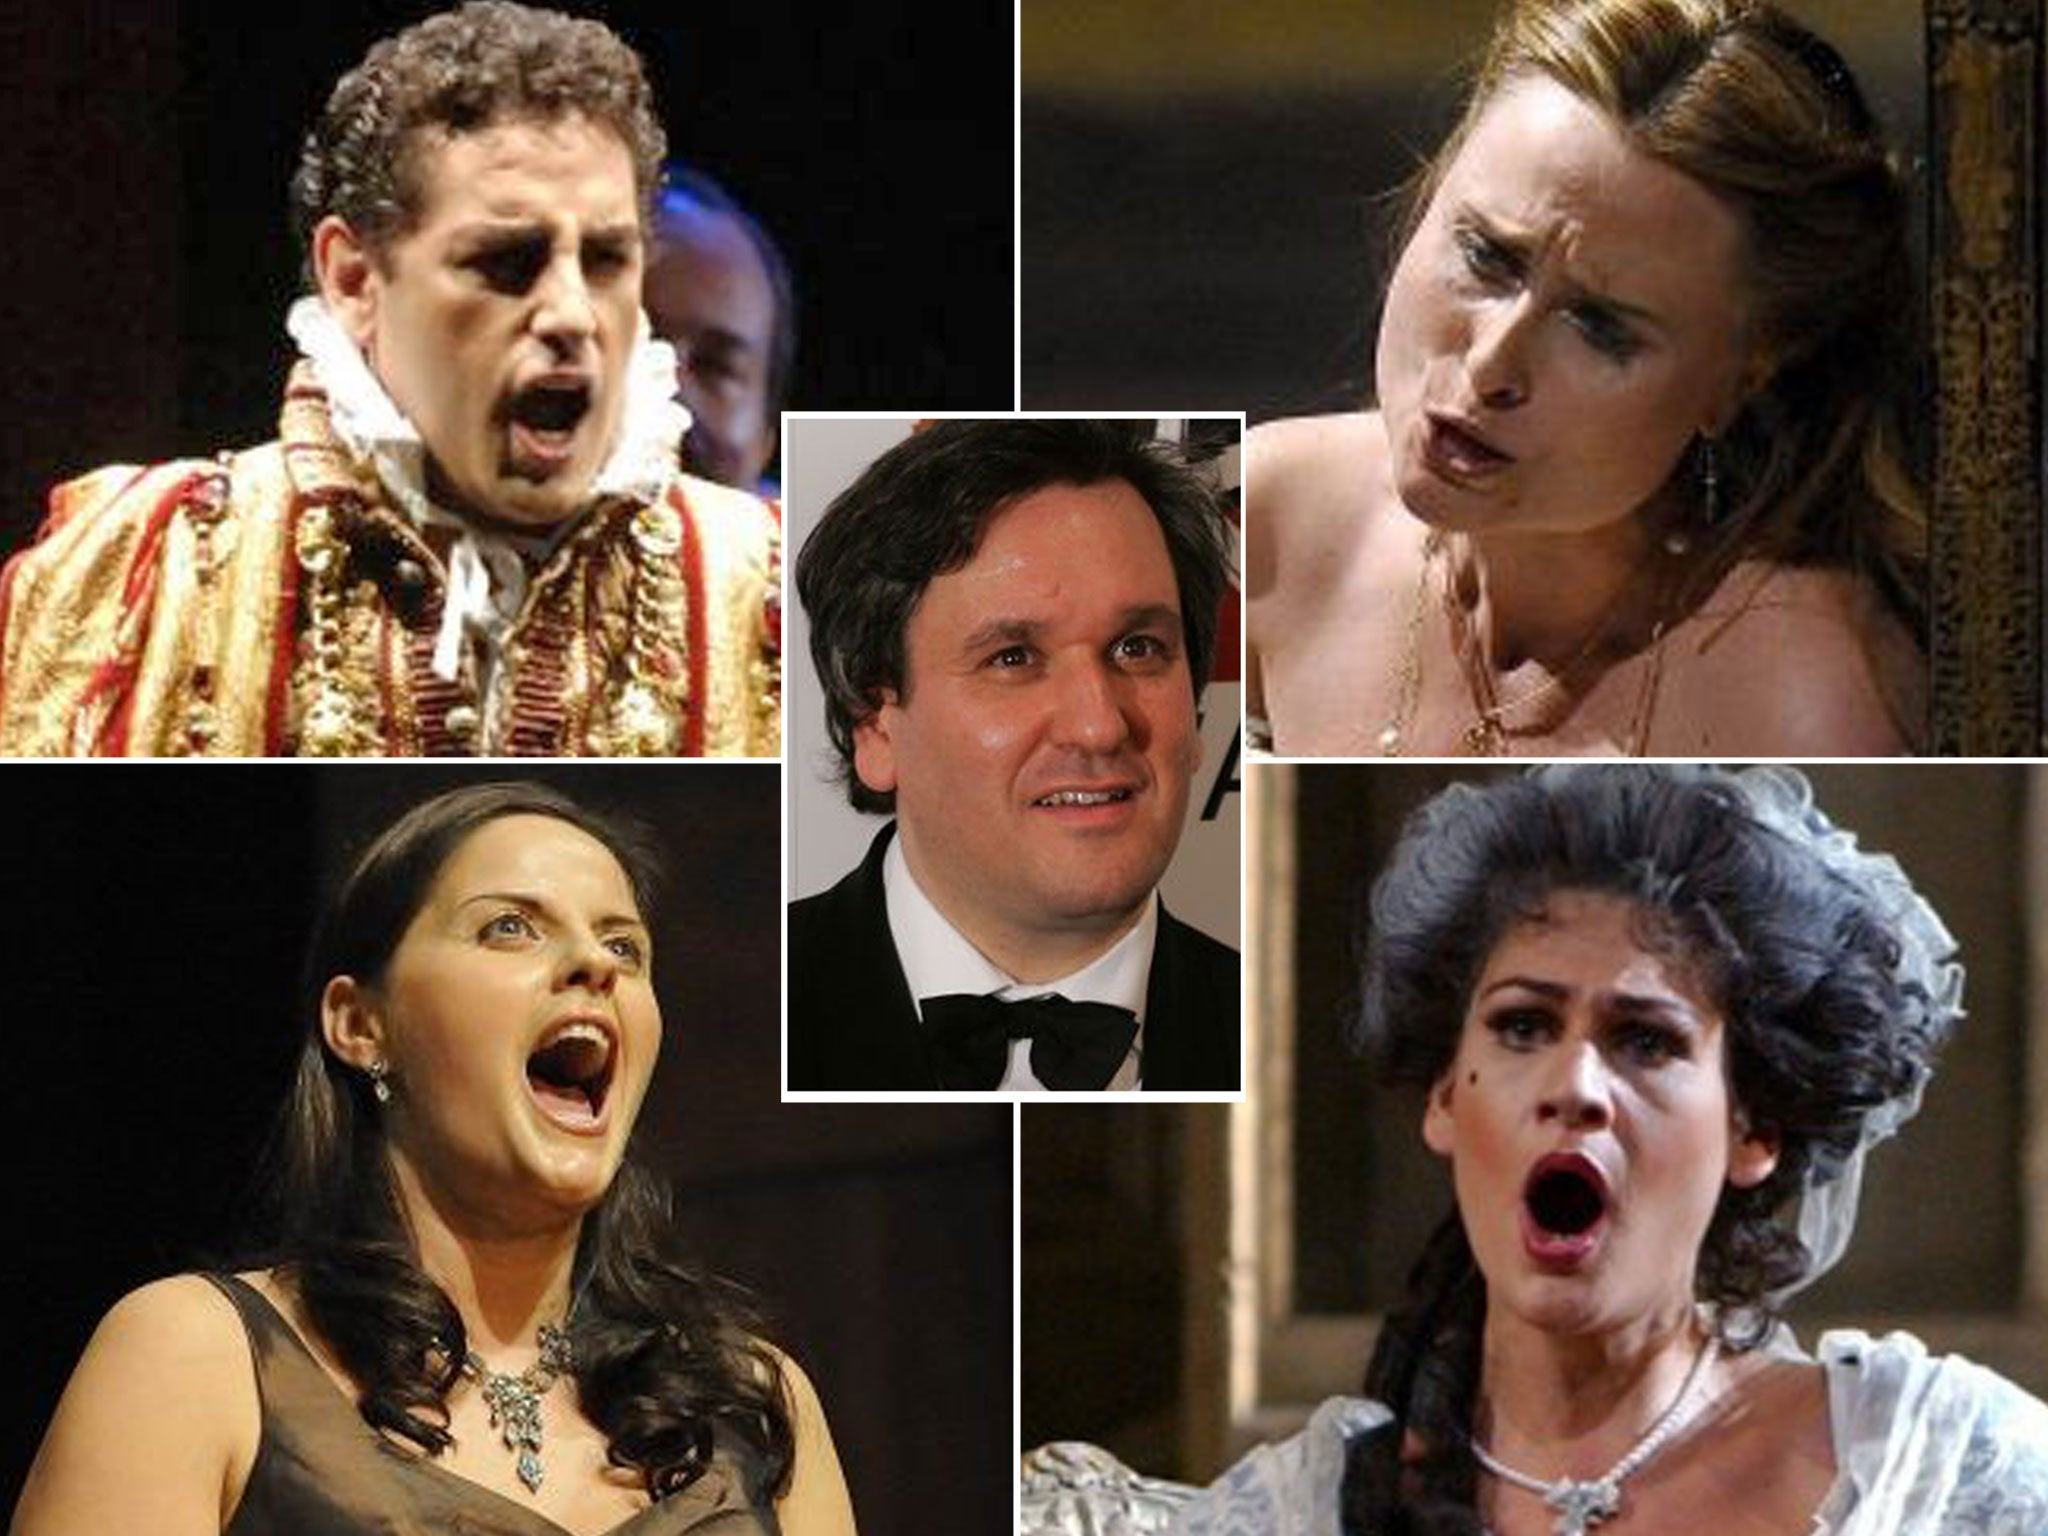 Royal Opera House chief, Sir Antonio Pappano, has criticised young opera stars. Clockwise from top left: Juan Diego Florez, Marina Poplavskaya, Anja Harteros and Celine Byrne have all pulled out of performances at the ROH